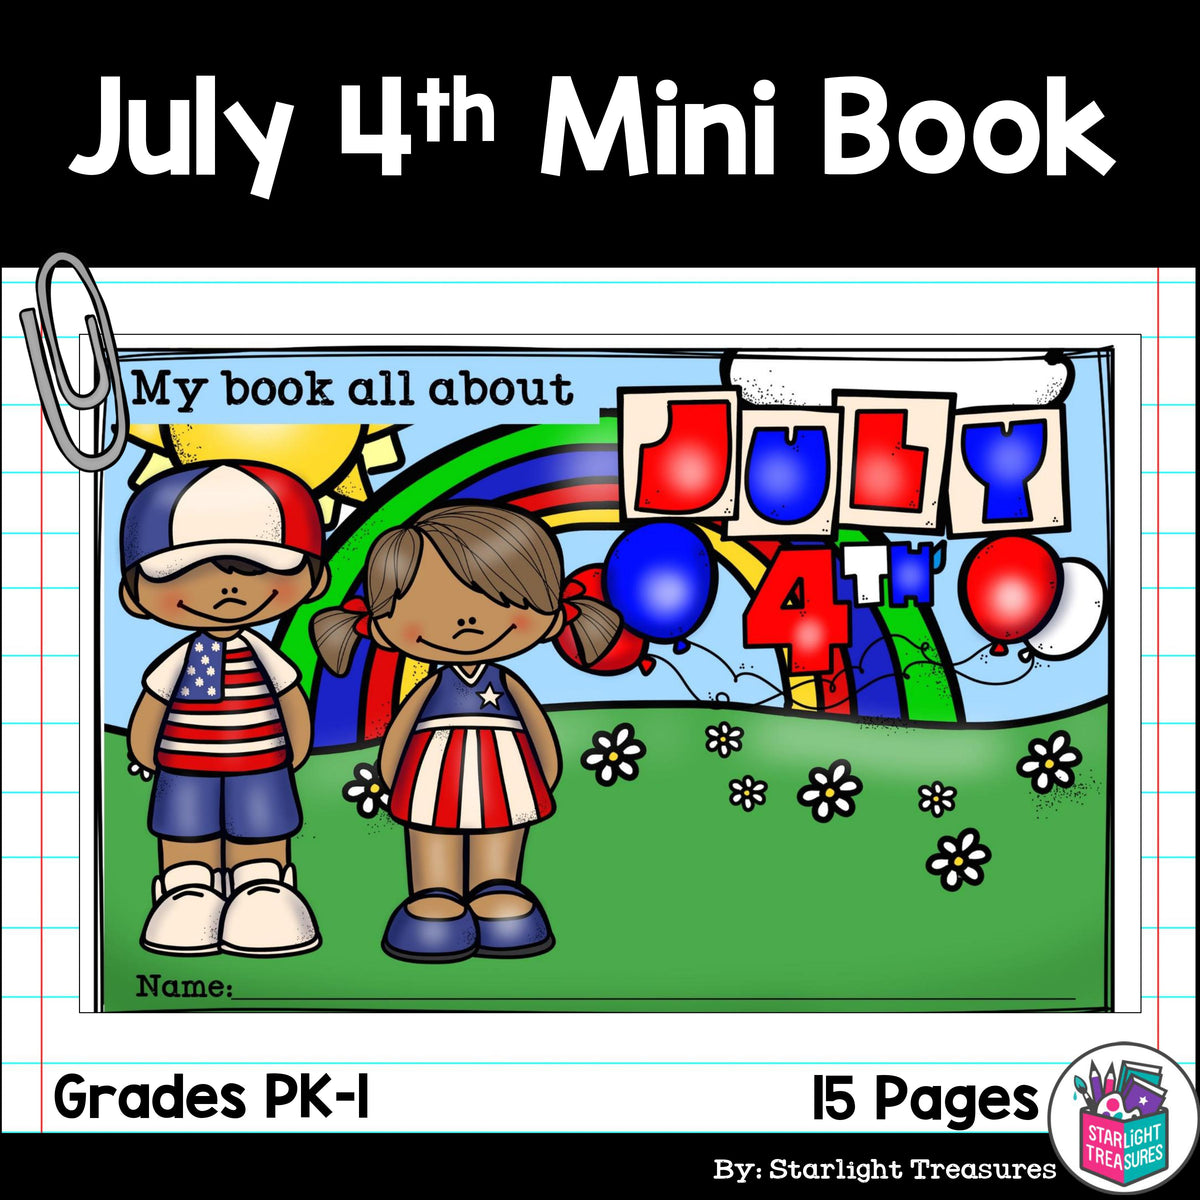 independence-day-mini-book-for-early-readers-starlight-treasures-llc